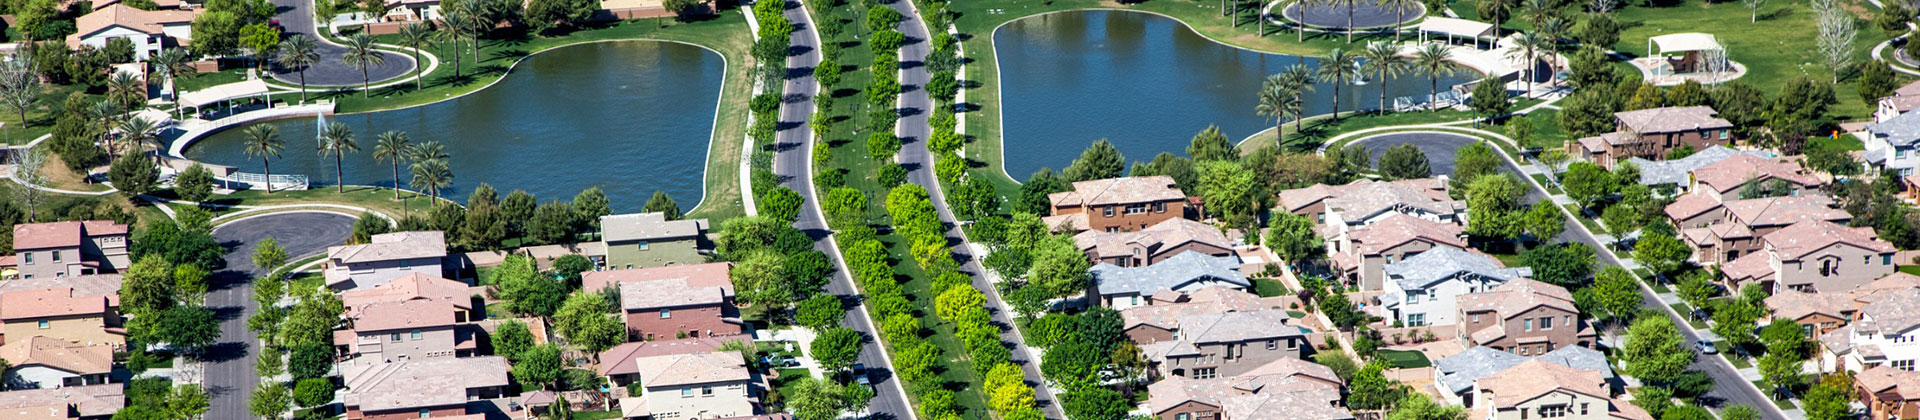 Tree-Lined Streets in Suburb With Small Lakes